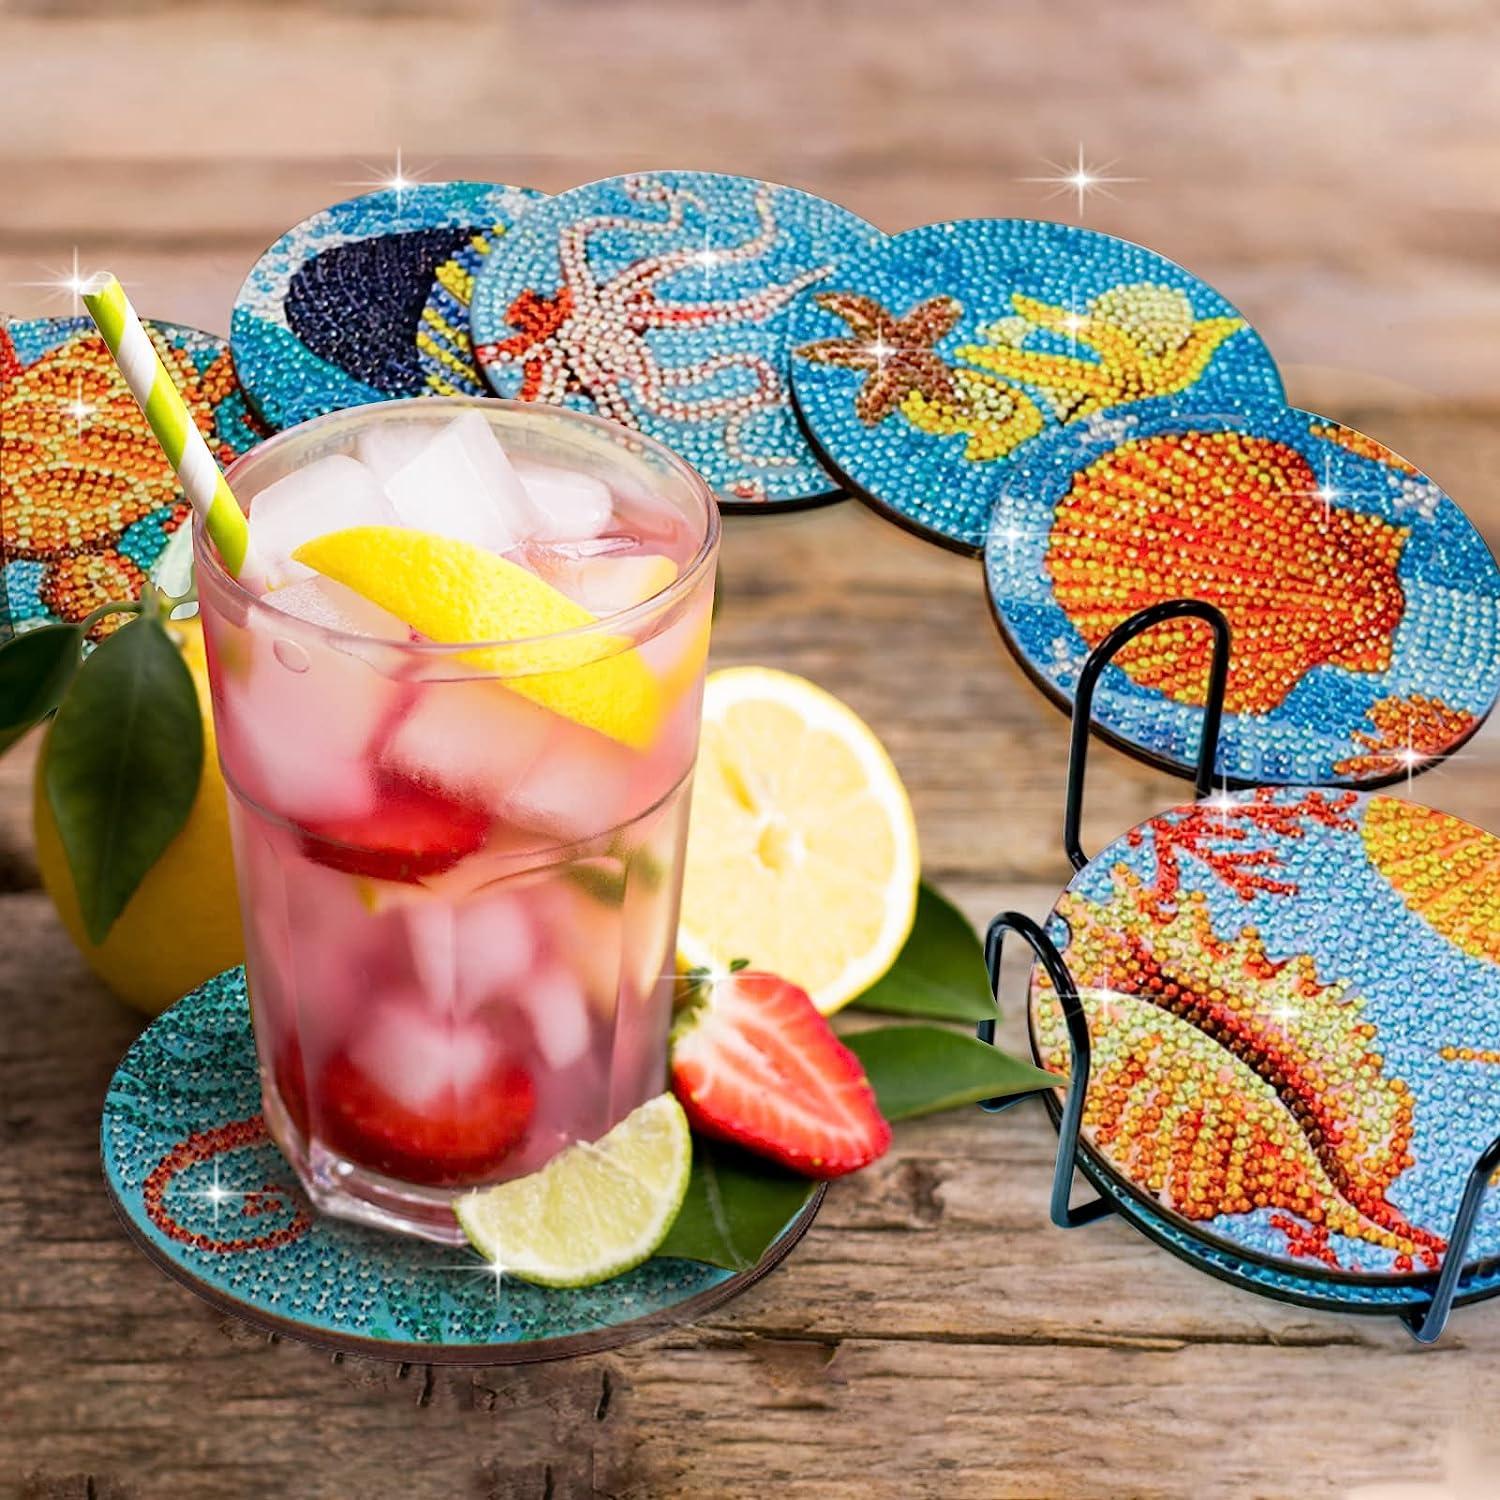 8 Pieces Diamond Painting Coasters Kit with Holder,DIY Beach Theme Ocean  Life Diamond Painting Coasters,Diamond Art Craft for Beginners Adults &  Kids Housewarming Gifts Home Kitchen Table Decor